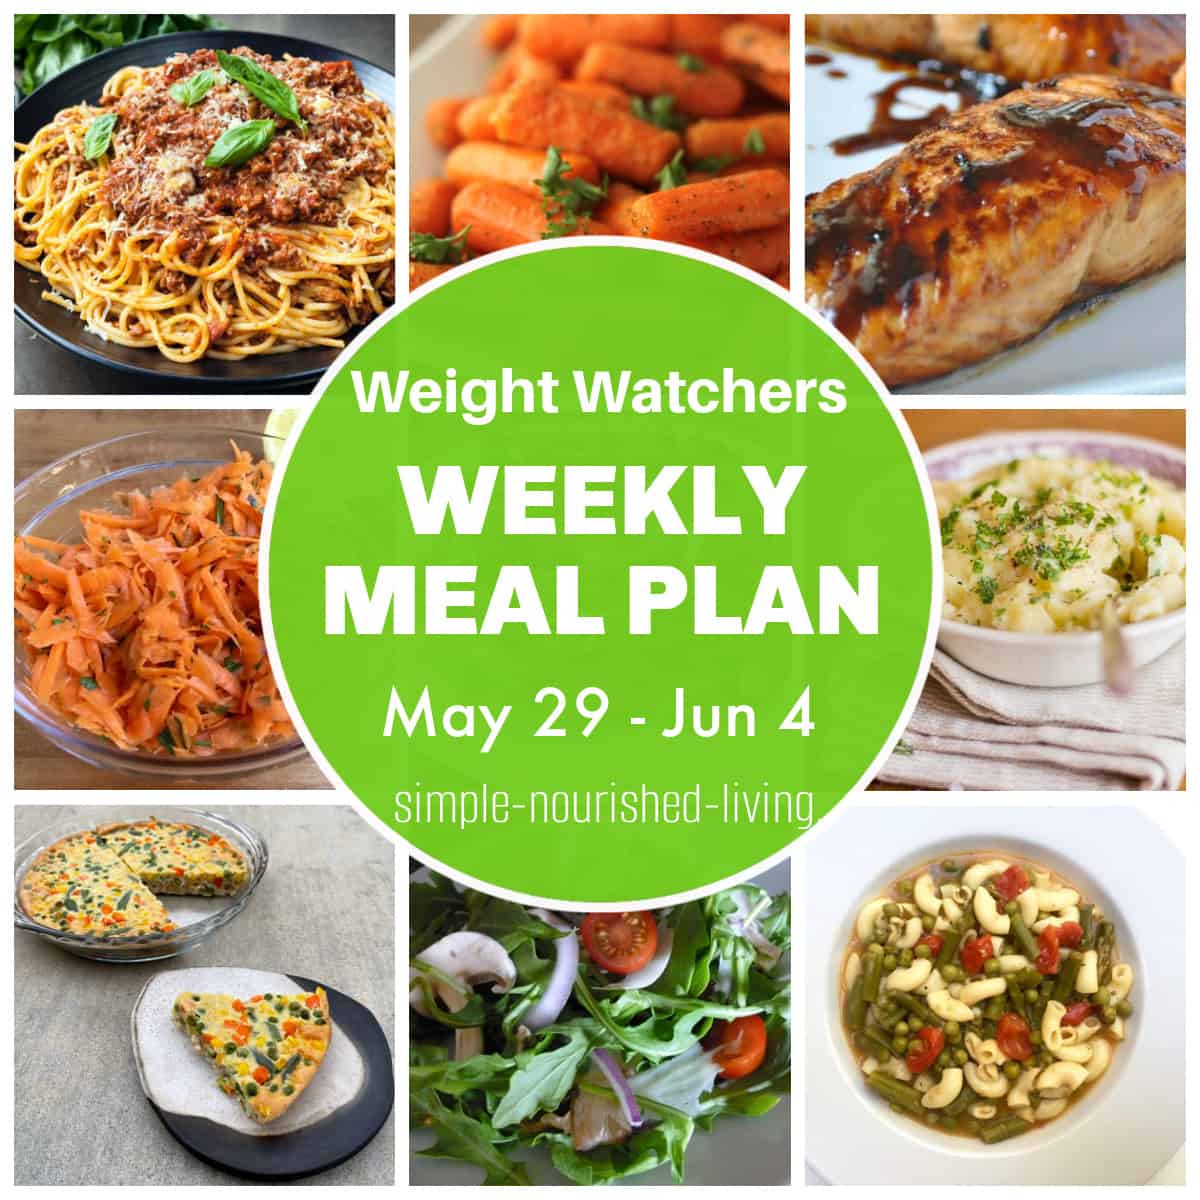 Weight Watchers Weekly Meal Plan Food Photo Collage: Slow Cooker Turkey Bolognese Sauce over Pasta, Roasted Baby Carrots, Glazed Salmon Fillet, Shredded Carrot Salad, Mashed Potatoes, Broccoli Chicken Impossibly Easy Pie, Arugula Salad, Asparagus Minestrone Soup